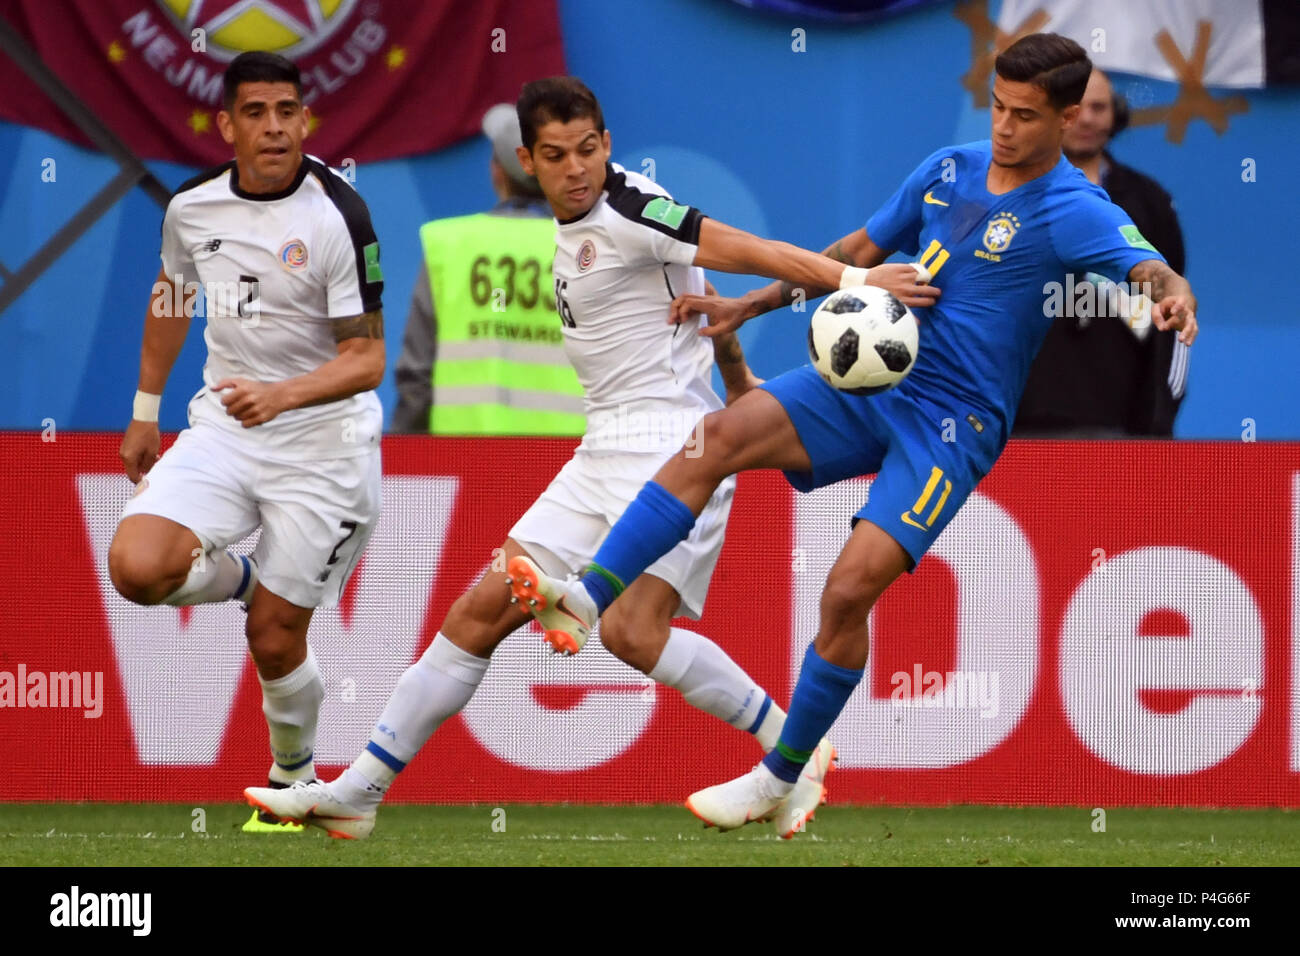 Saint Petersburg, Russia. 22nd June, 2018. Soccer: Preliminary round, Group E, 2nd matchday: Brazil vs Costa Rica in the St. Petersburg Stadium: Costa Rica's Johnny Acosta (left to right), Cristian Gamboa and Brazil's Philippe Coutinho in action. Credit: Federico Gambarini/dpa/Alamy Live News Stock Photo